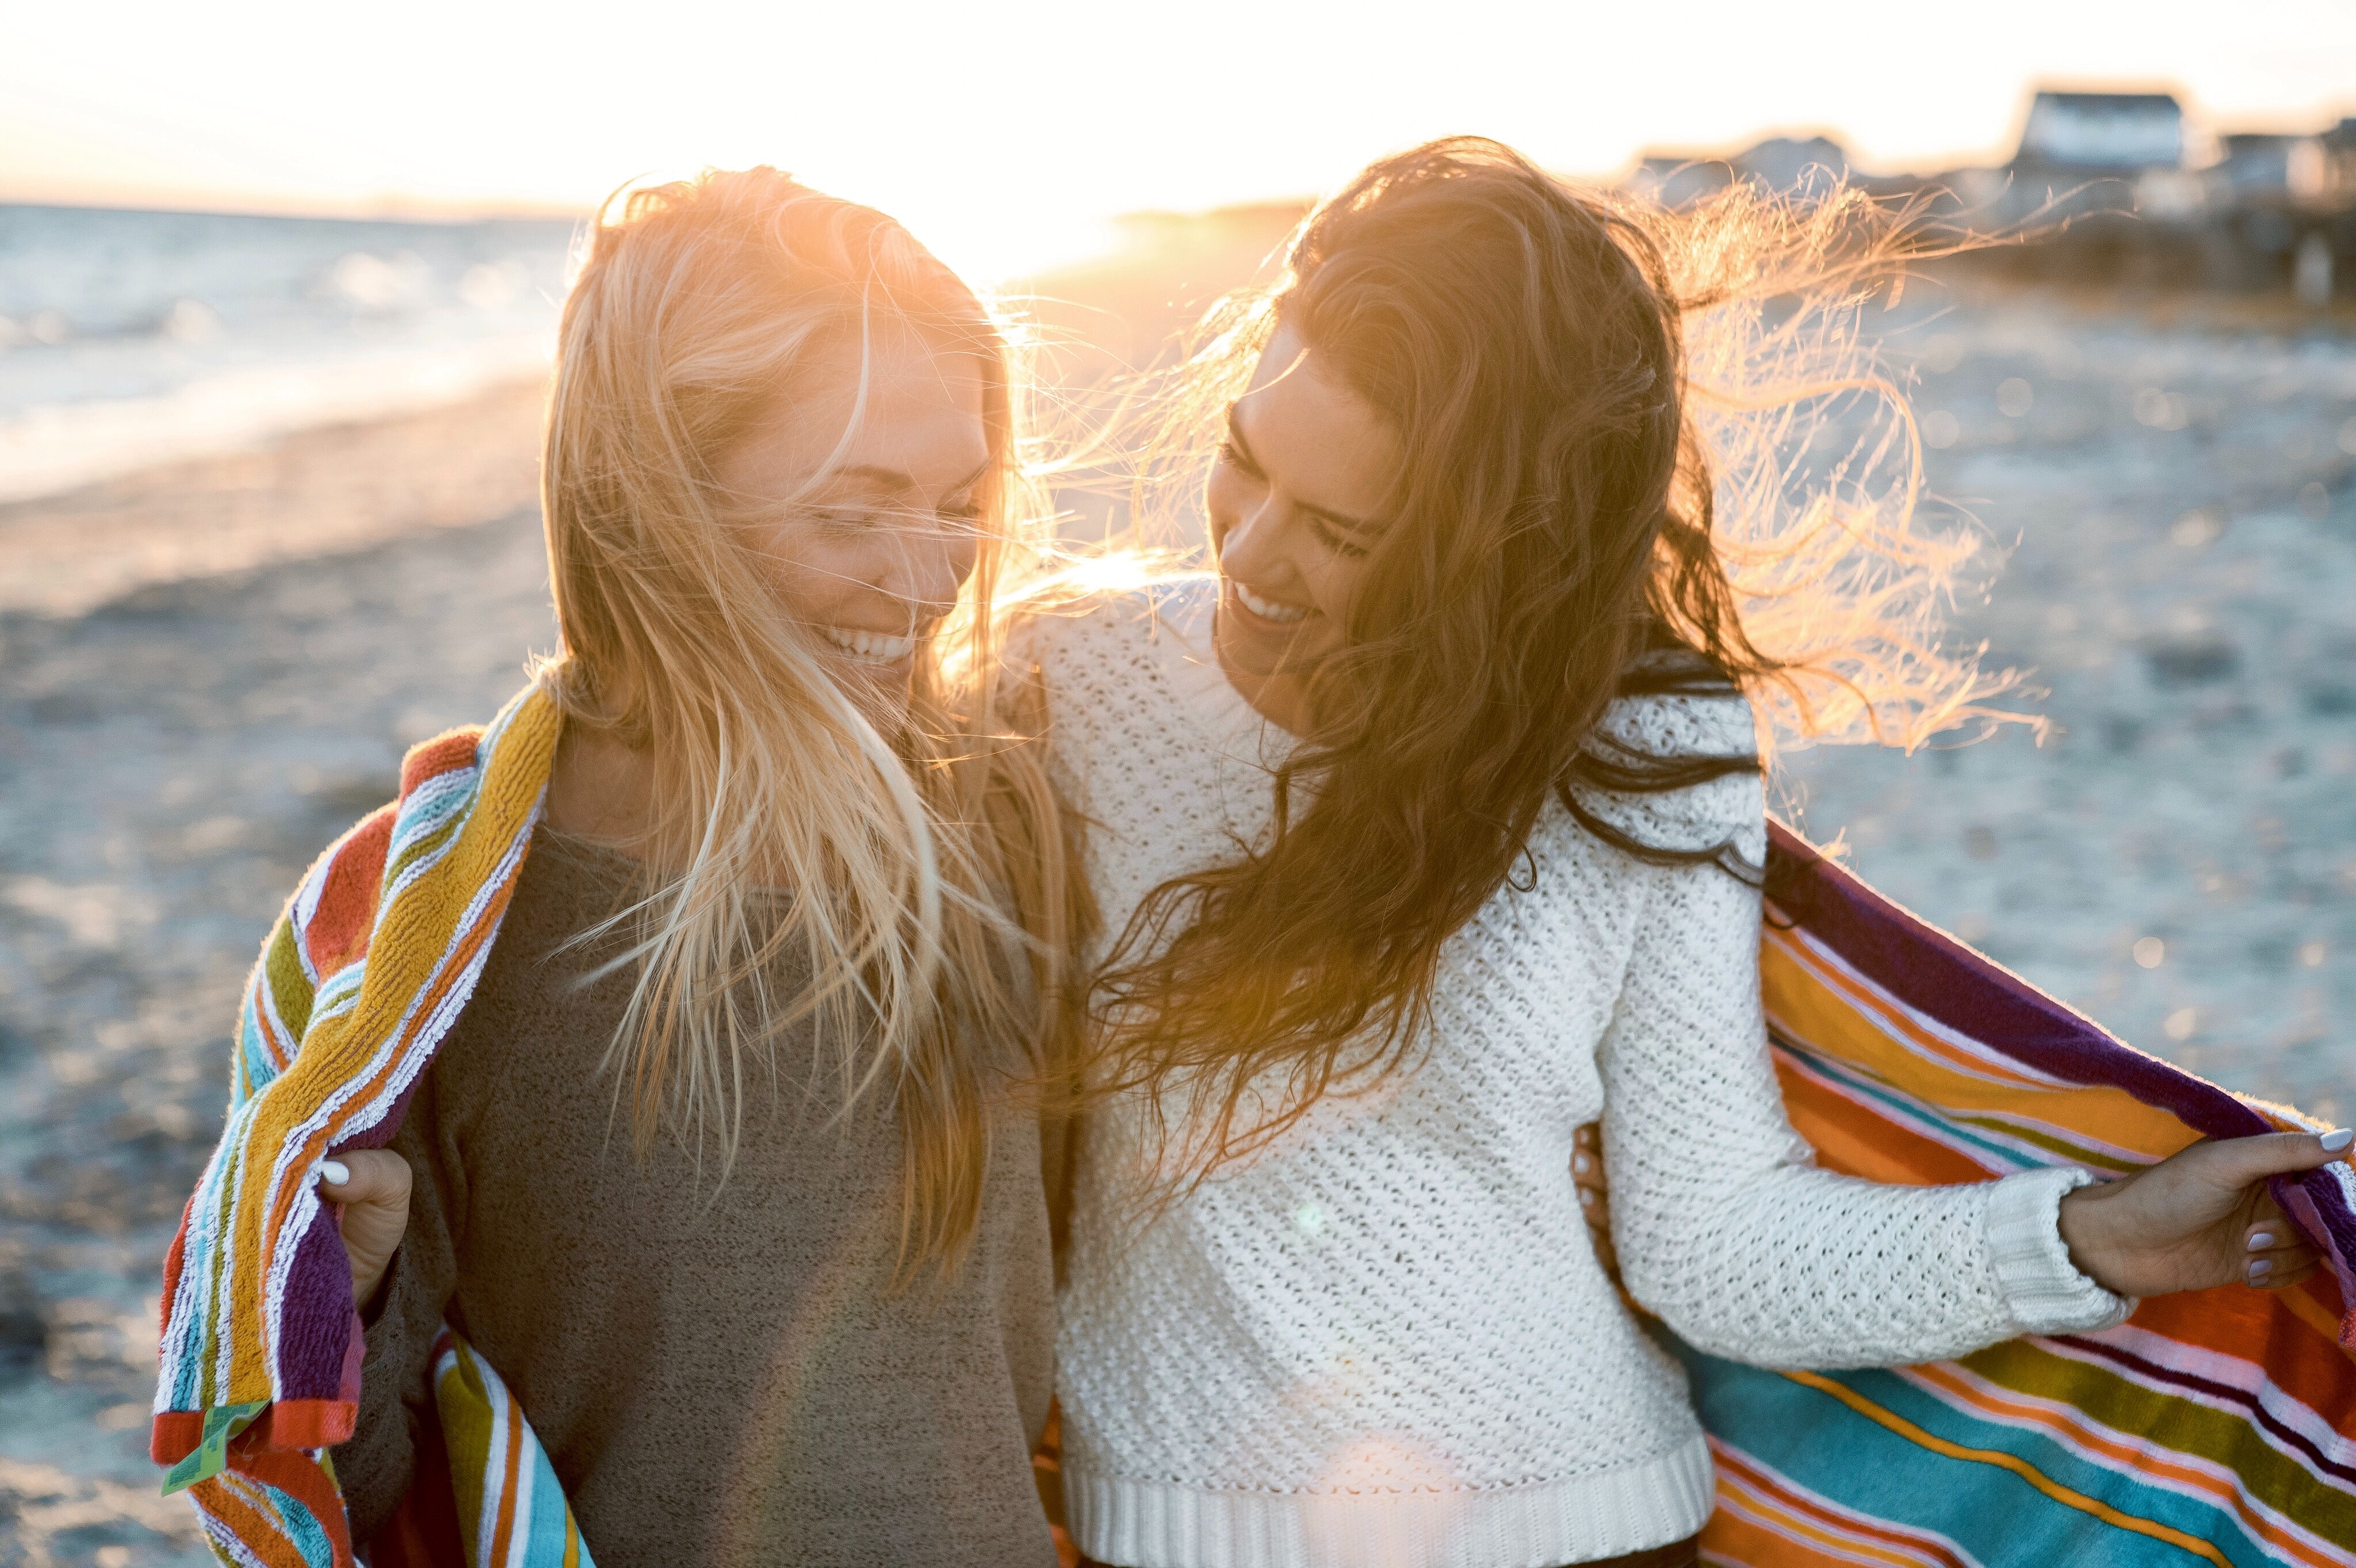 Two women hanging out at the seashore. | Source: Unsplash